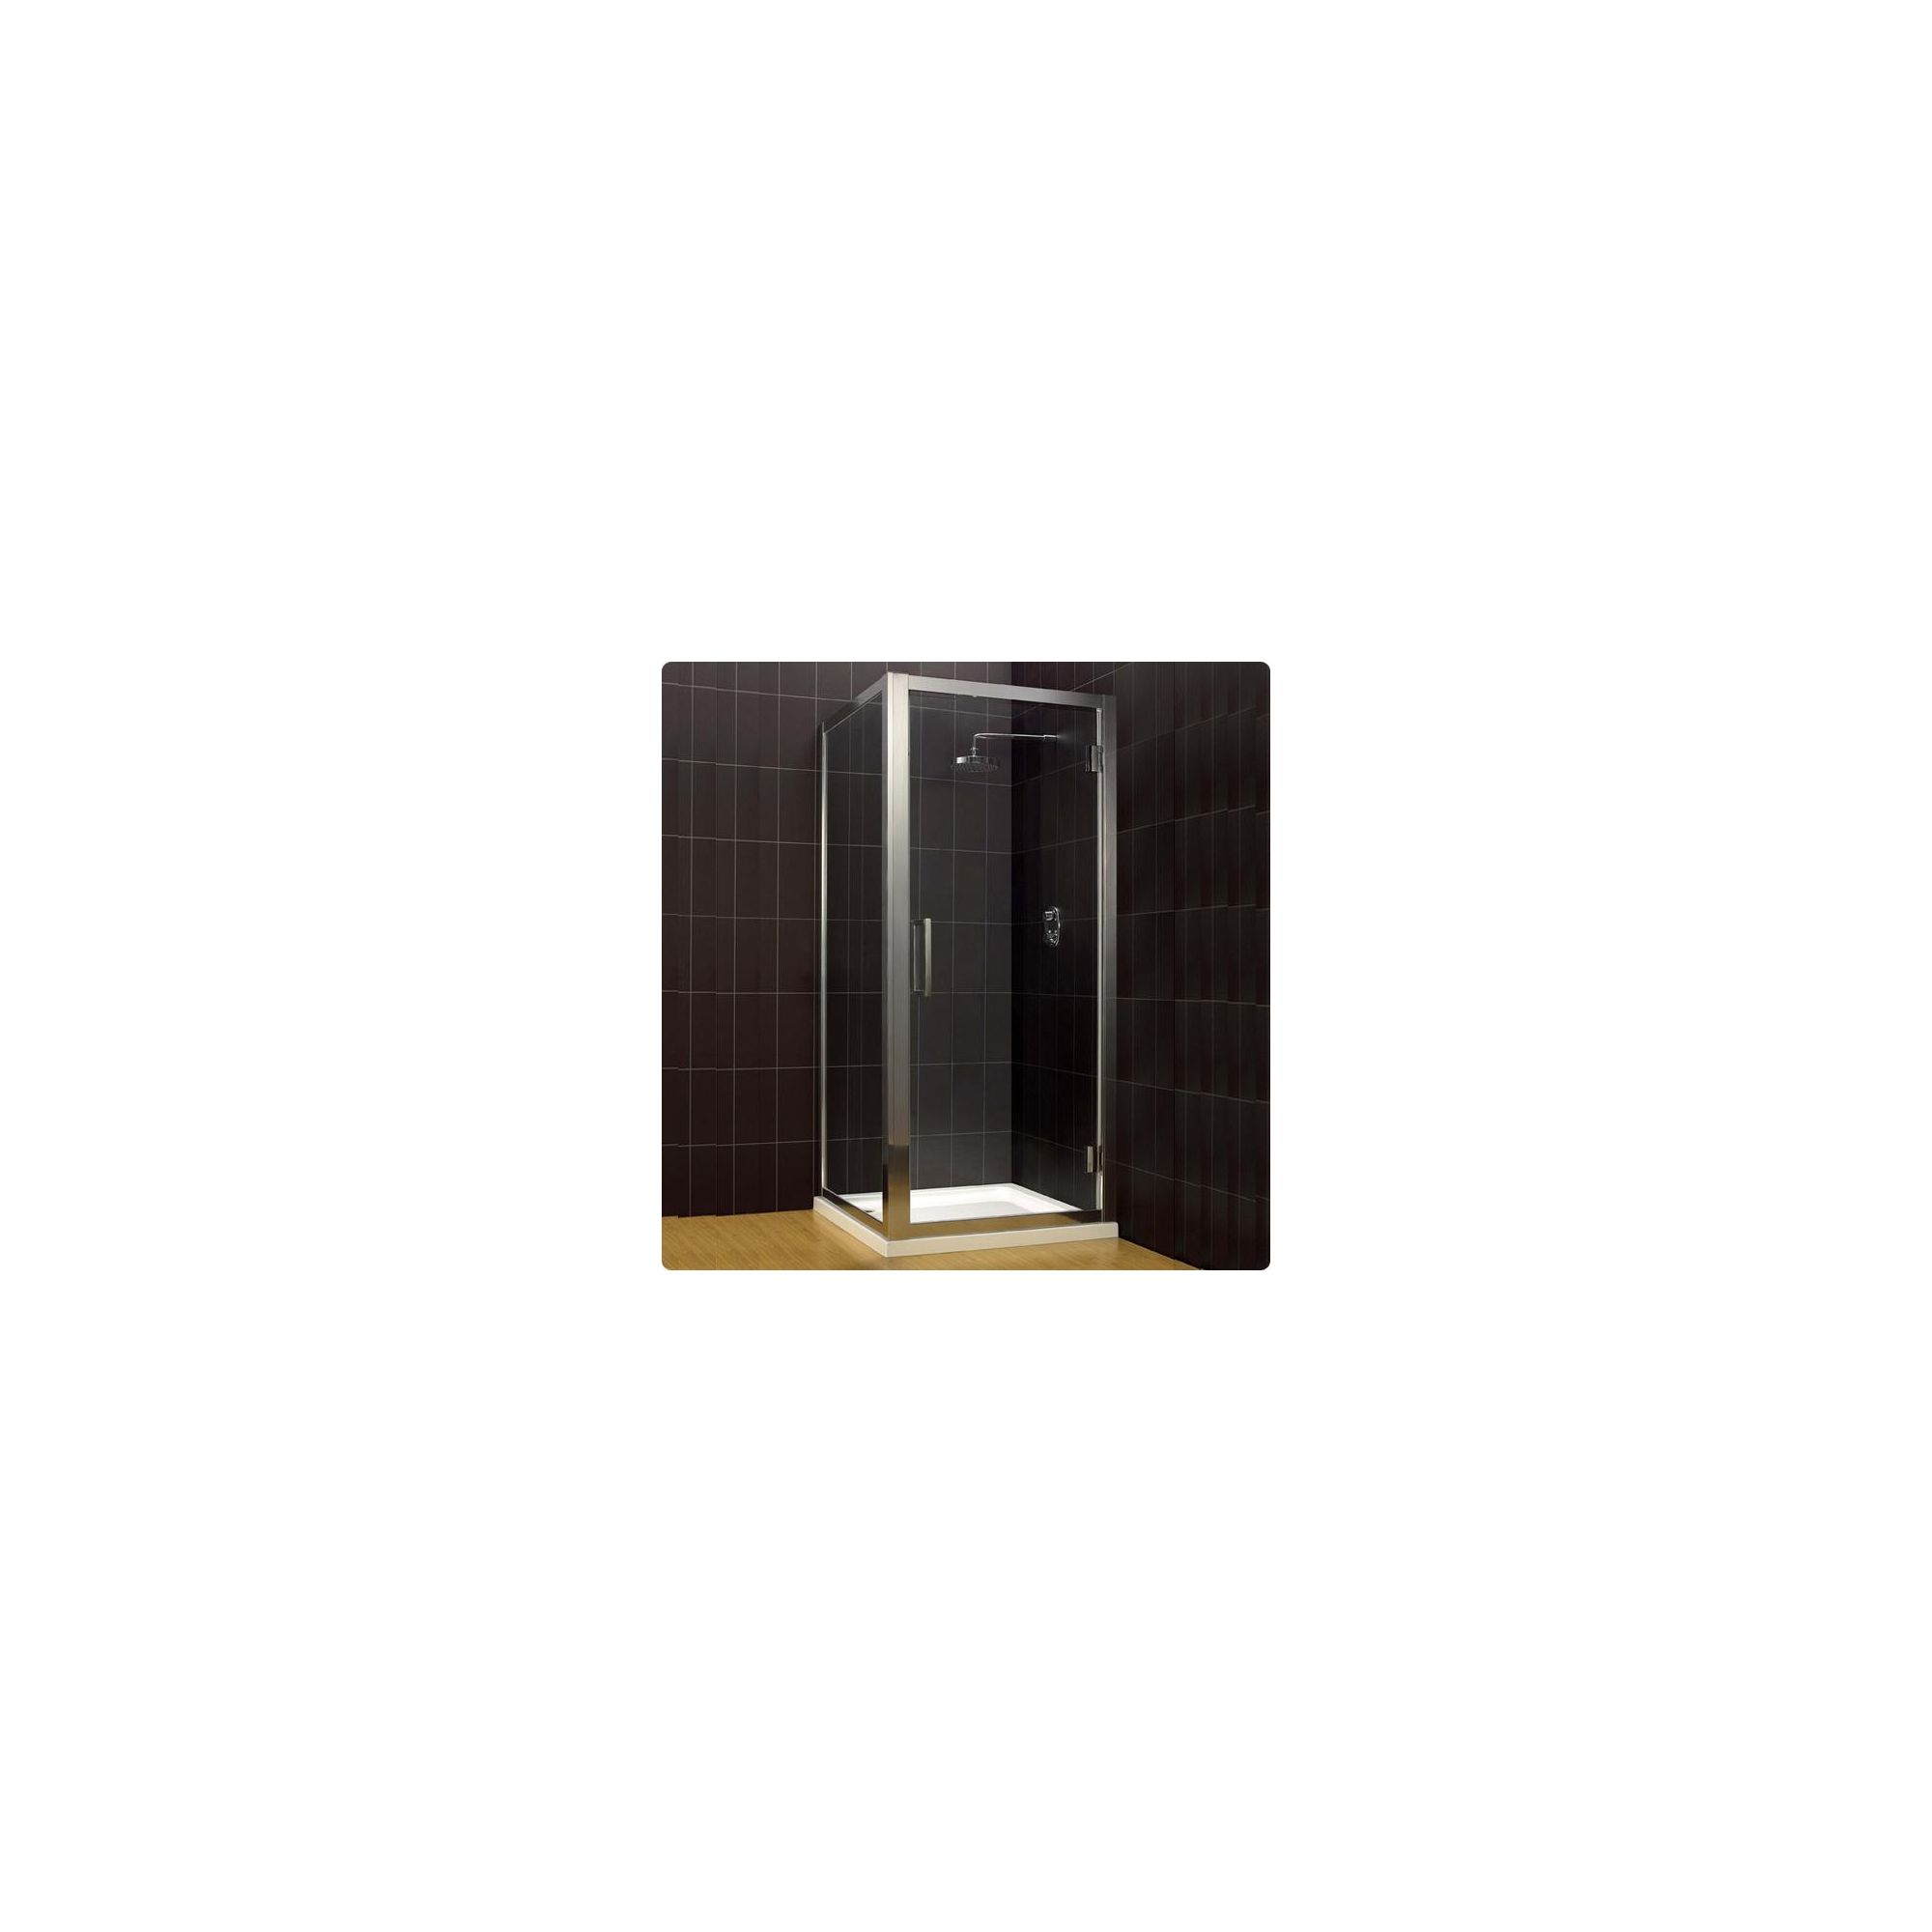 Duchy Supreme Silver Hinged Door Shower Enclosure, 900mm x 760mm, Standard Tray, 8mm Glass at Tesco Direct